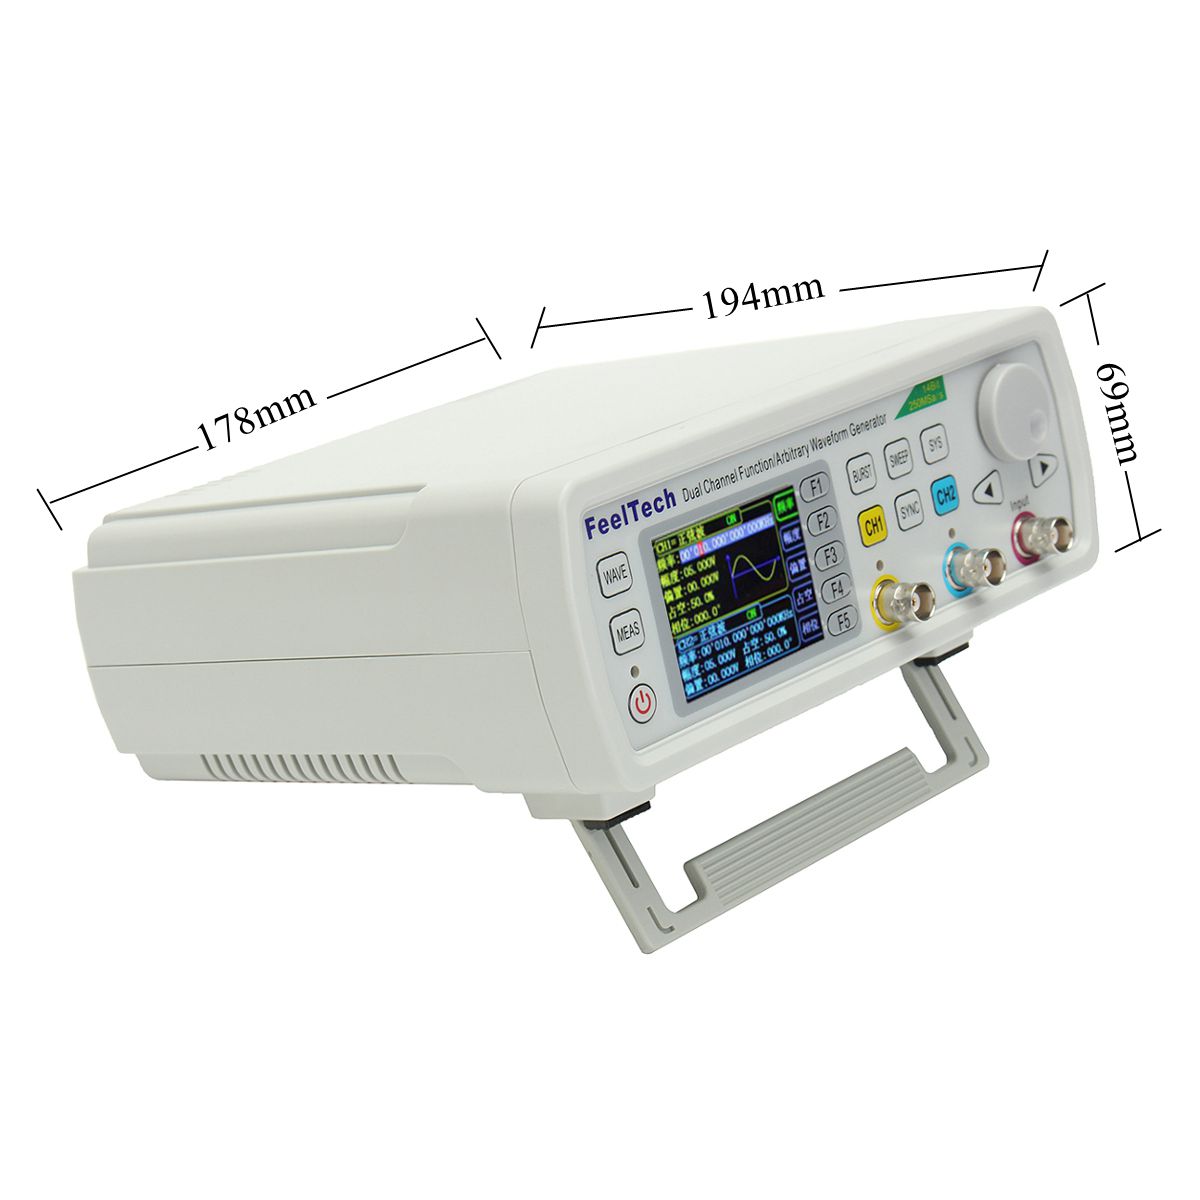 FY6600 Digital 12-60MHz Dual Channel DDS Function Arbitrary Waveform Signal Generator Frequency Meter 39